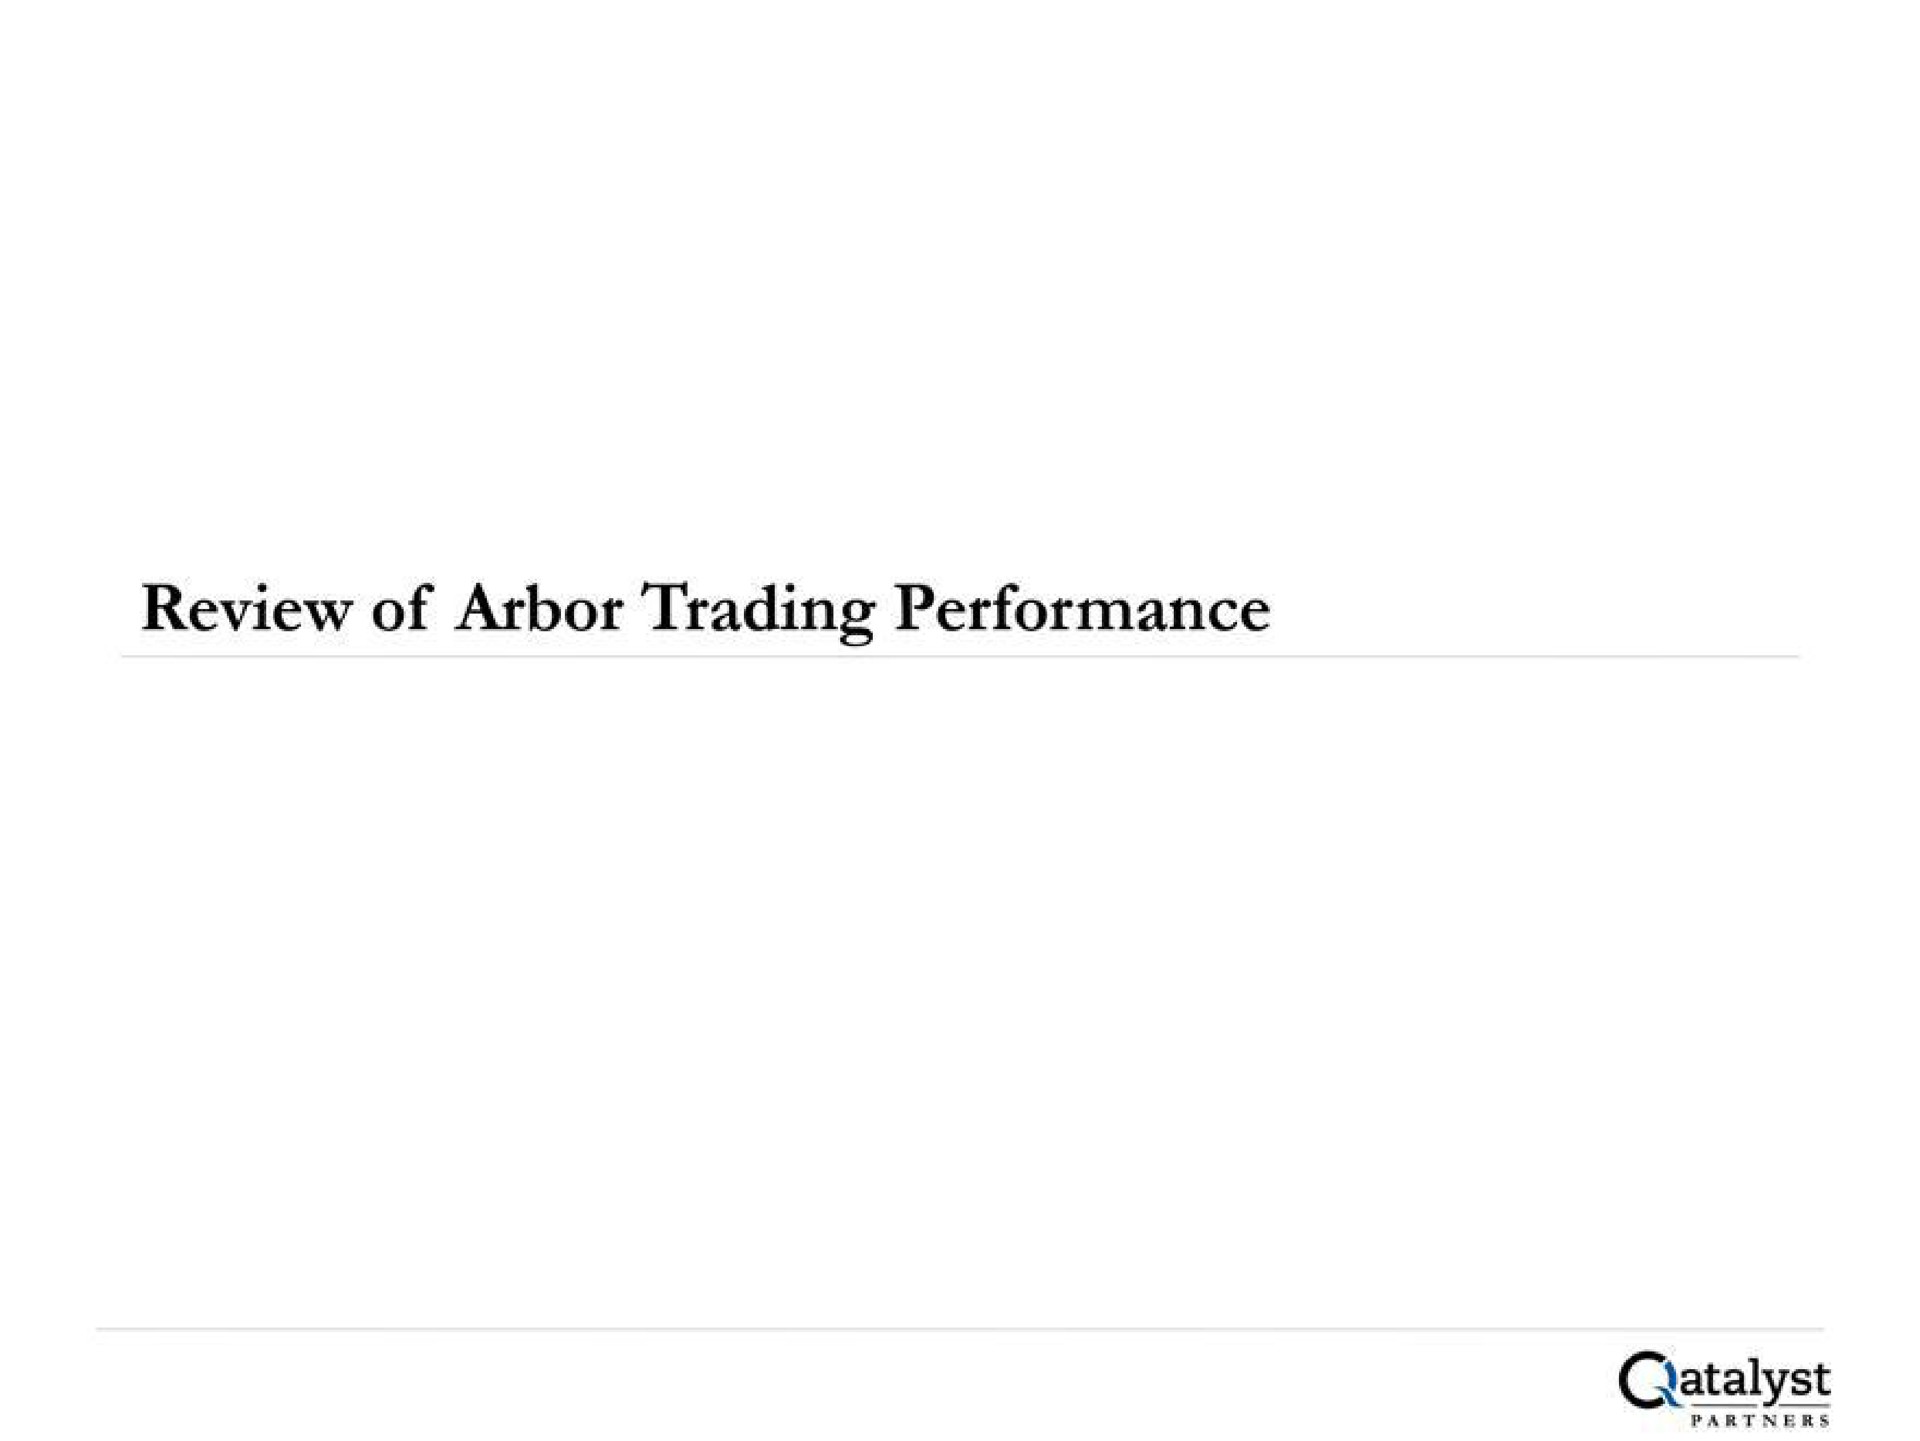 review of arbor trading performance | Qatalyst Partners